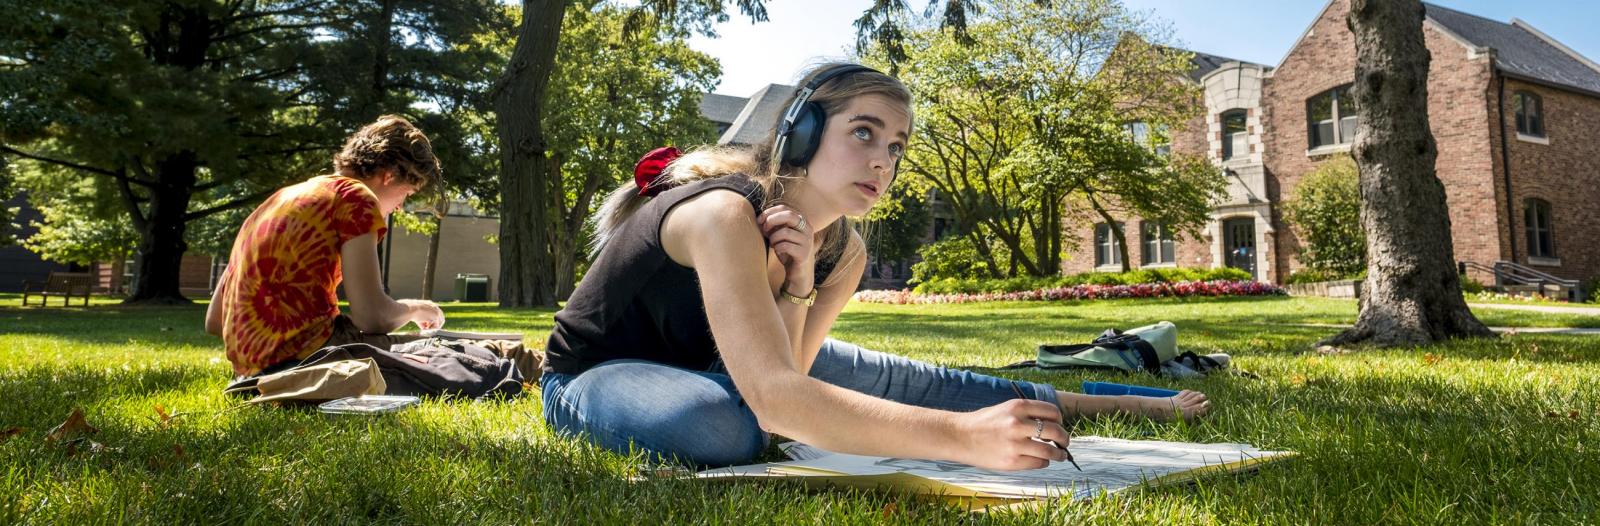 Two students sit in grass, one with headphones looking up